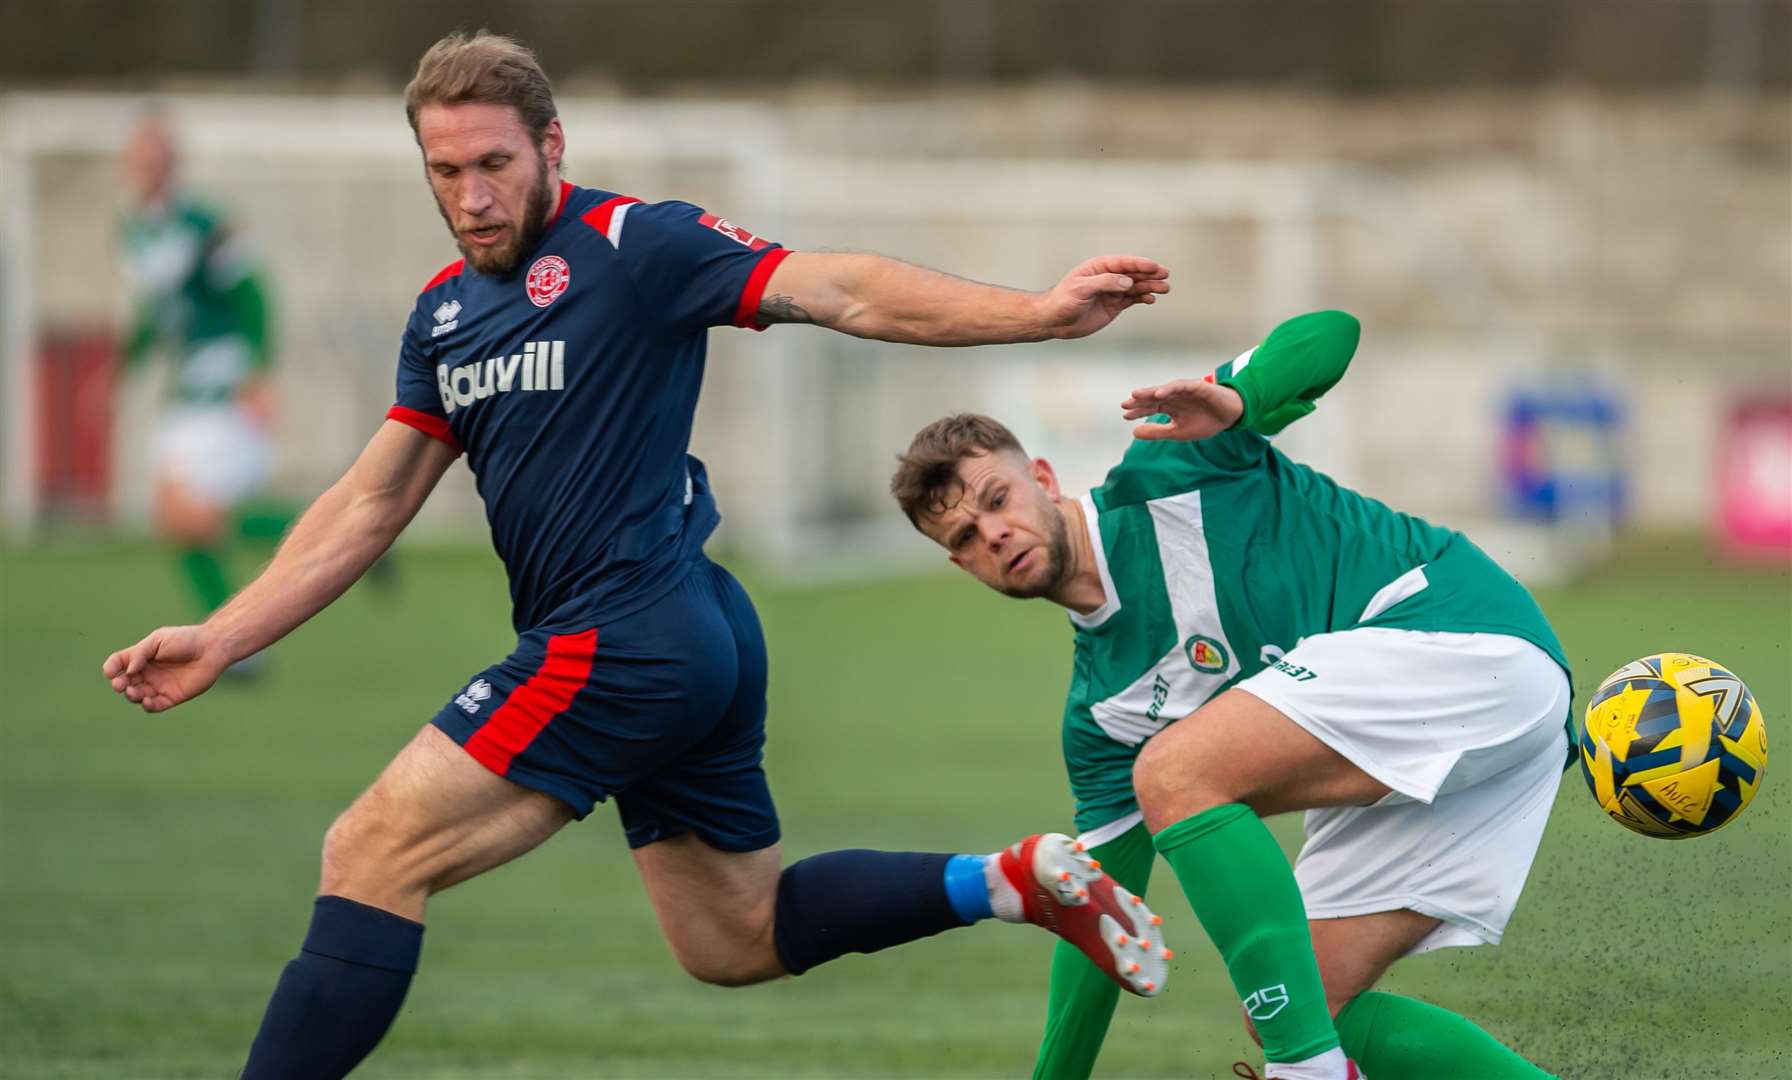 Ashford’s Henry Muggeridge and Chatham’s Matt Bodkinin in the thick of it. Picture: Ian Scammell